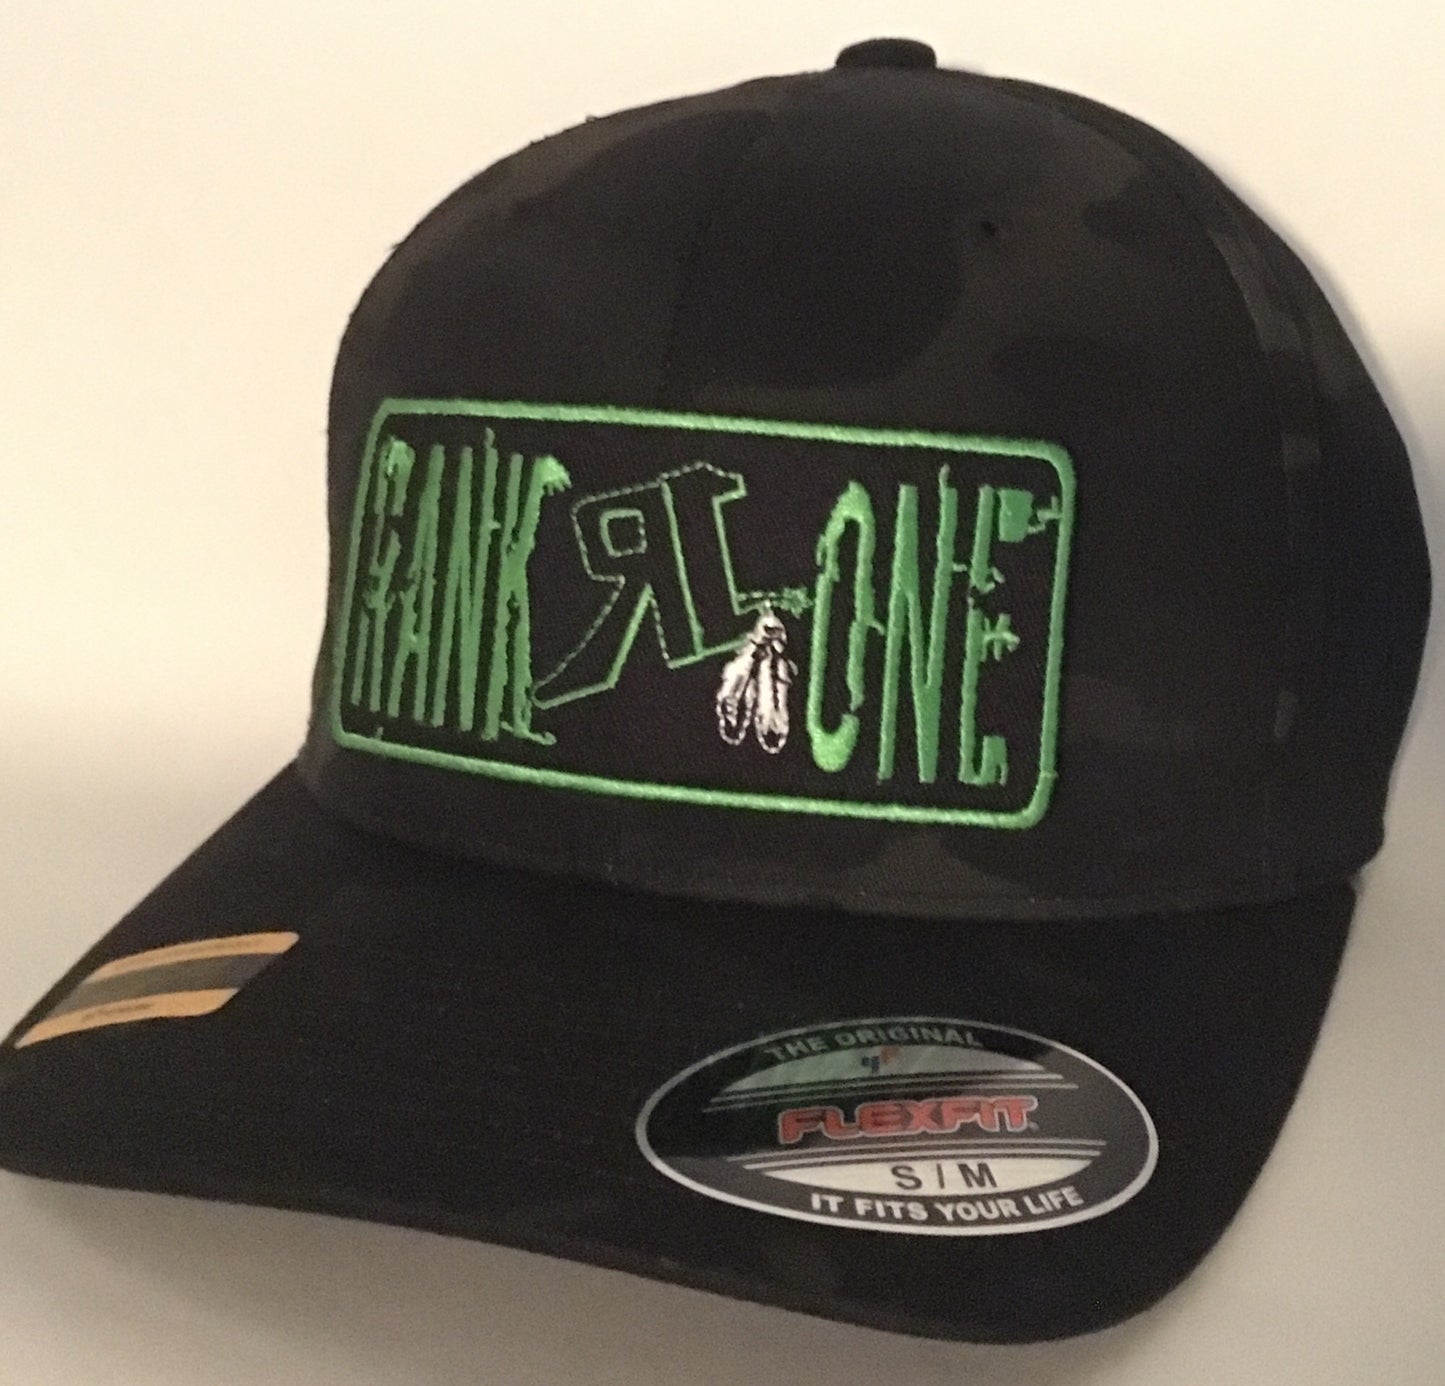 Black Camo and Lime Green Patch Fitted Cap  (H19-0005)